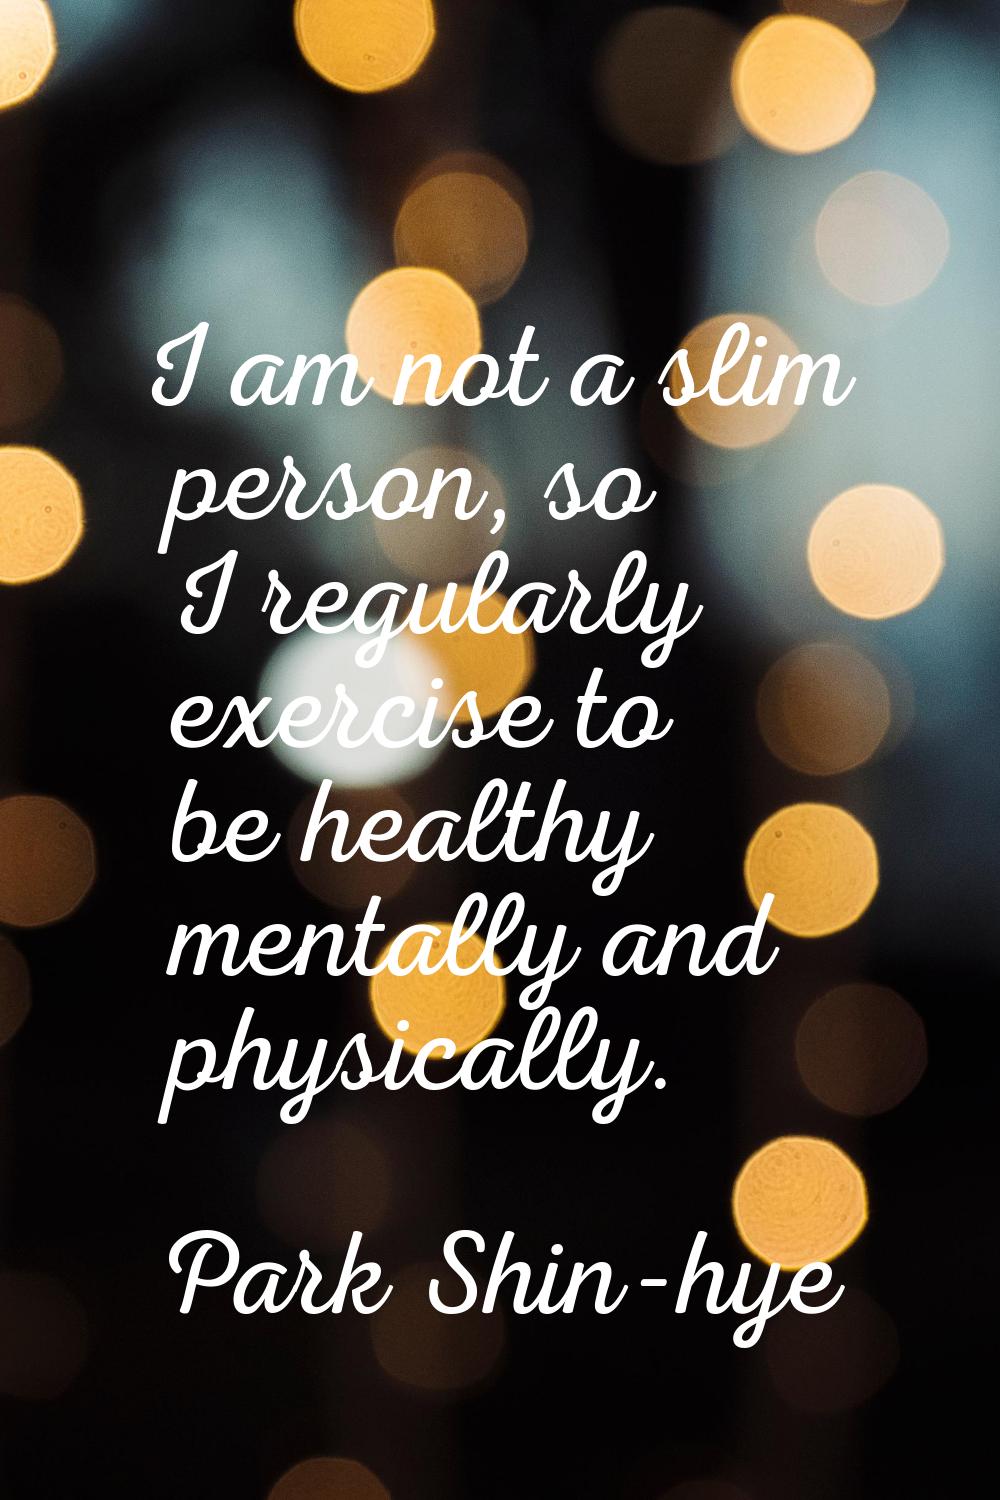 I am not a slim person, so I regularly exercise to be healthy mentally and physically.